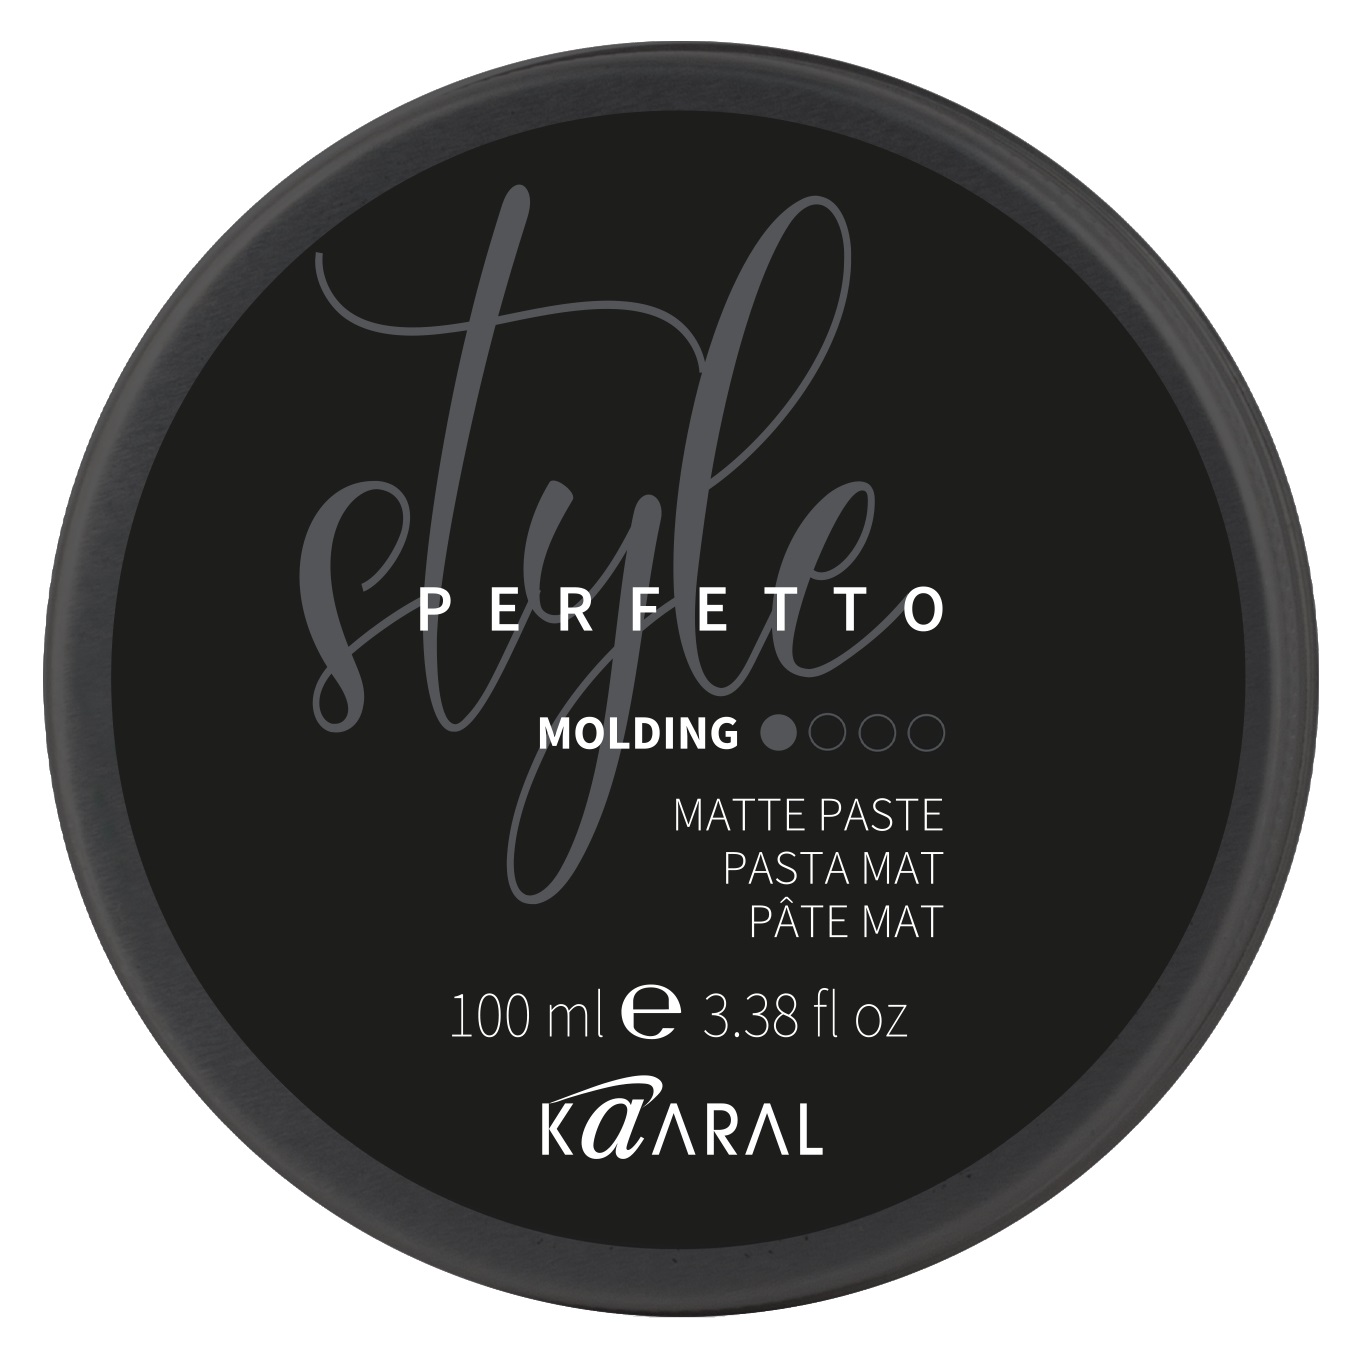 Kaaral Матовая паста Molding Matte Paste, 100 мл (Kaaral, Style Perfetto) матовая паста kaaral style perfetto molding matte paste 80 мл